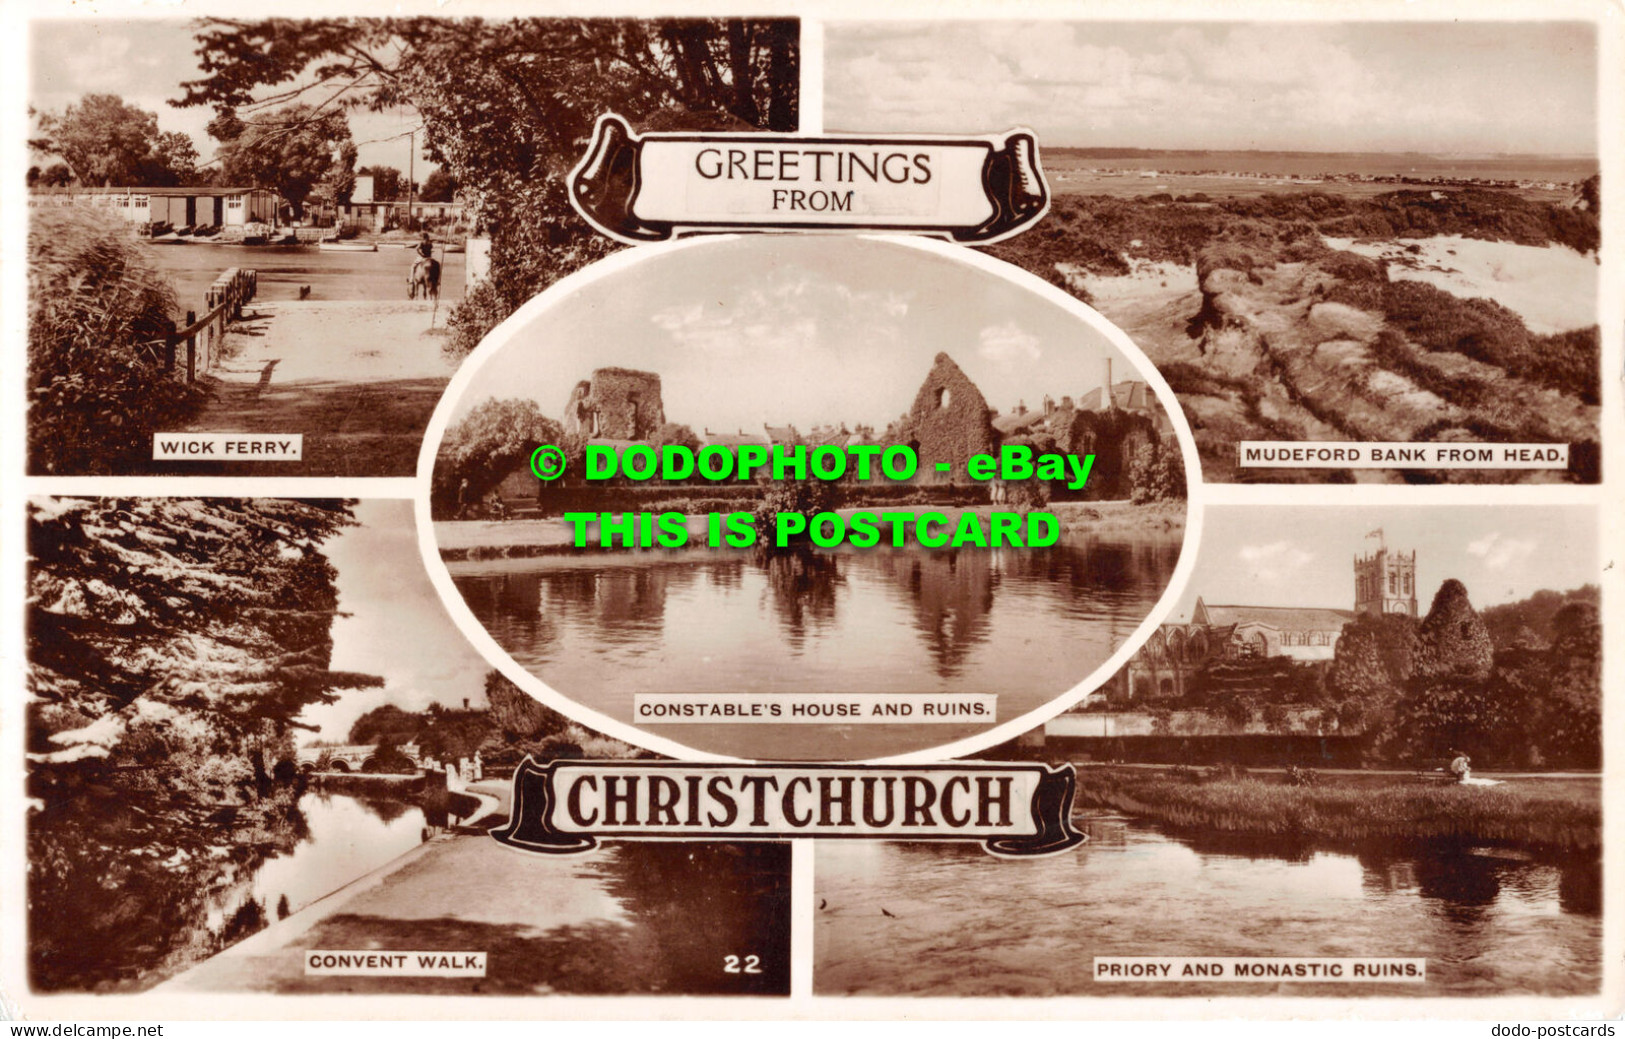 R495980 Greetings From Christchurch. Convent Walk. RP. Multi View. 1954 - Monde